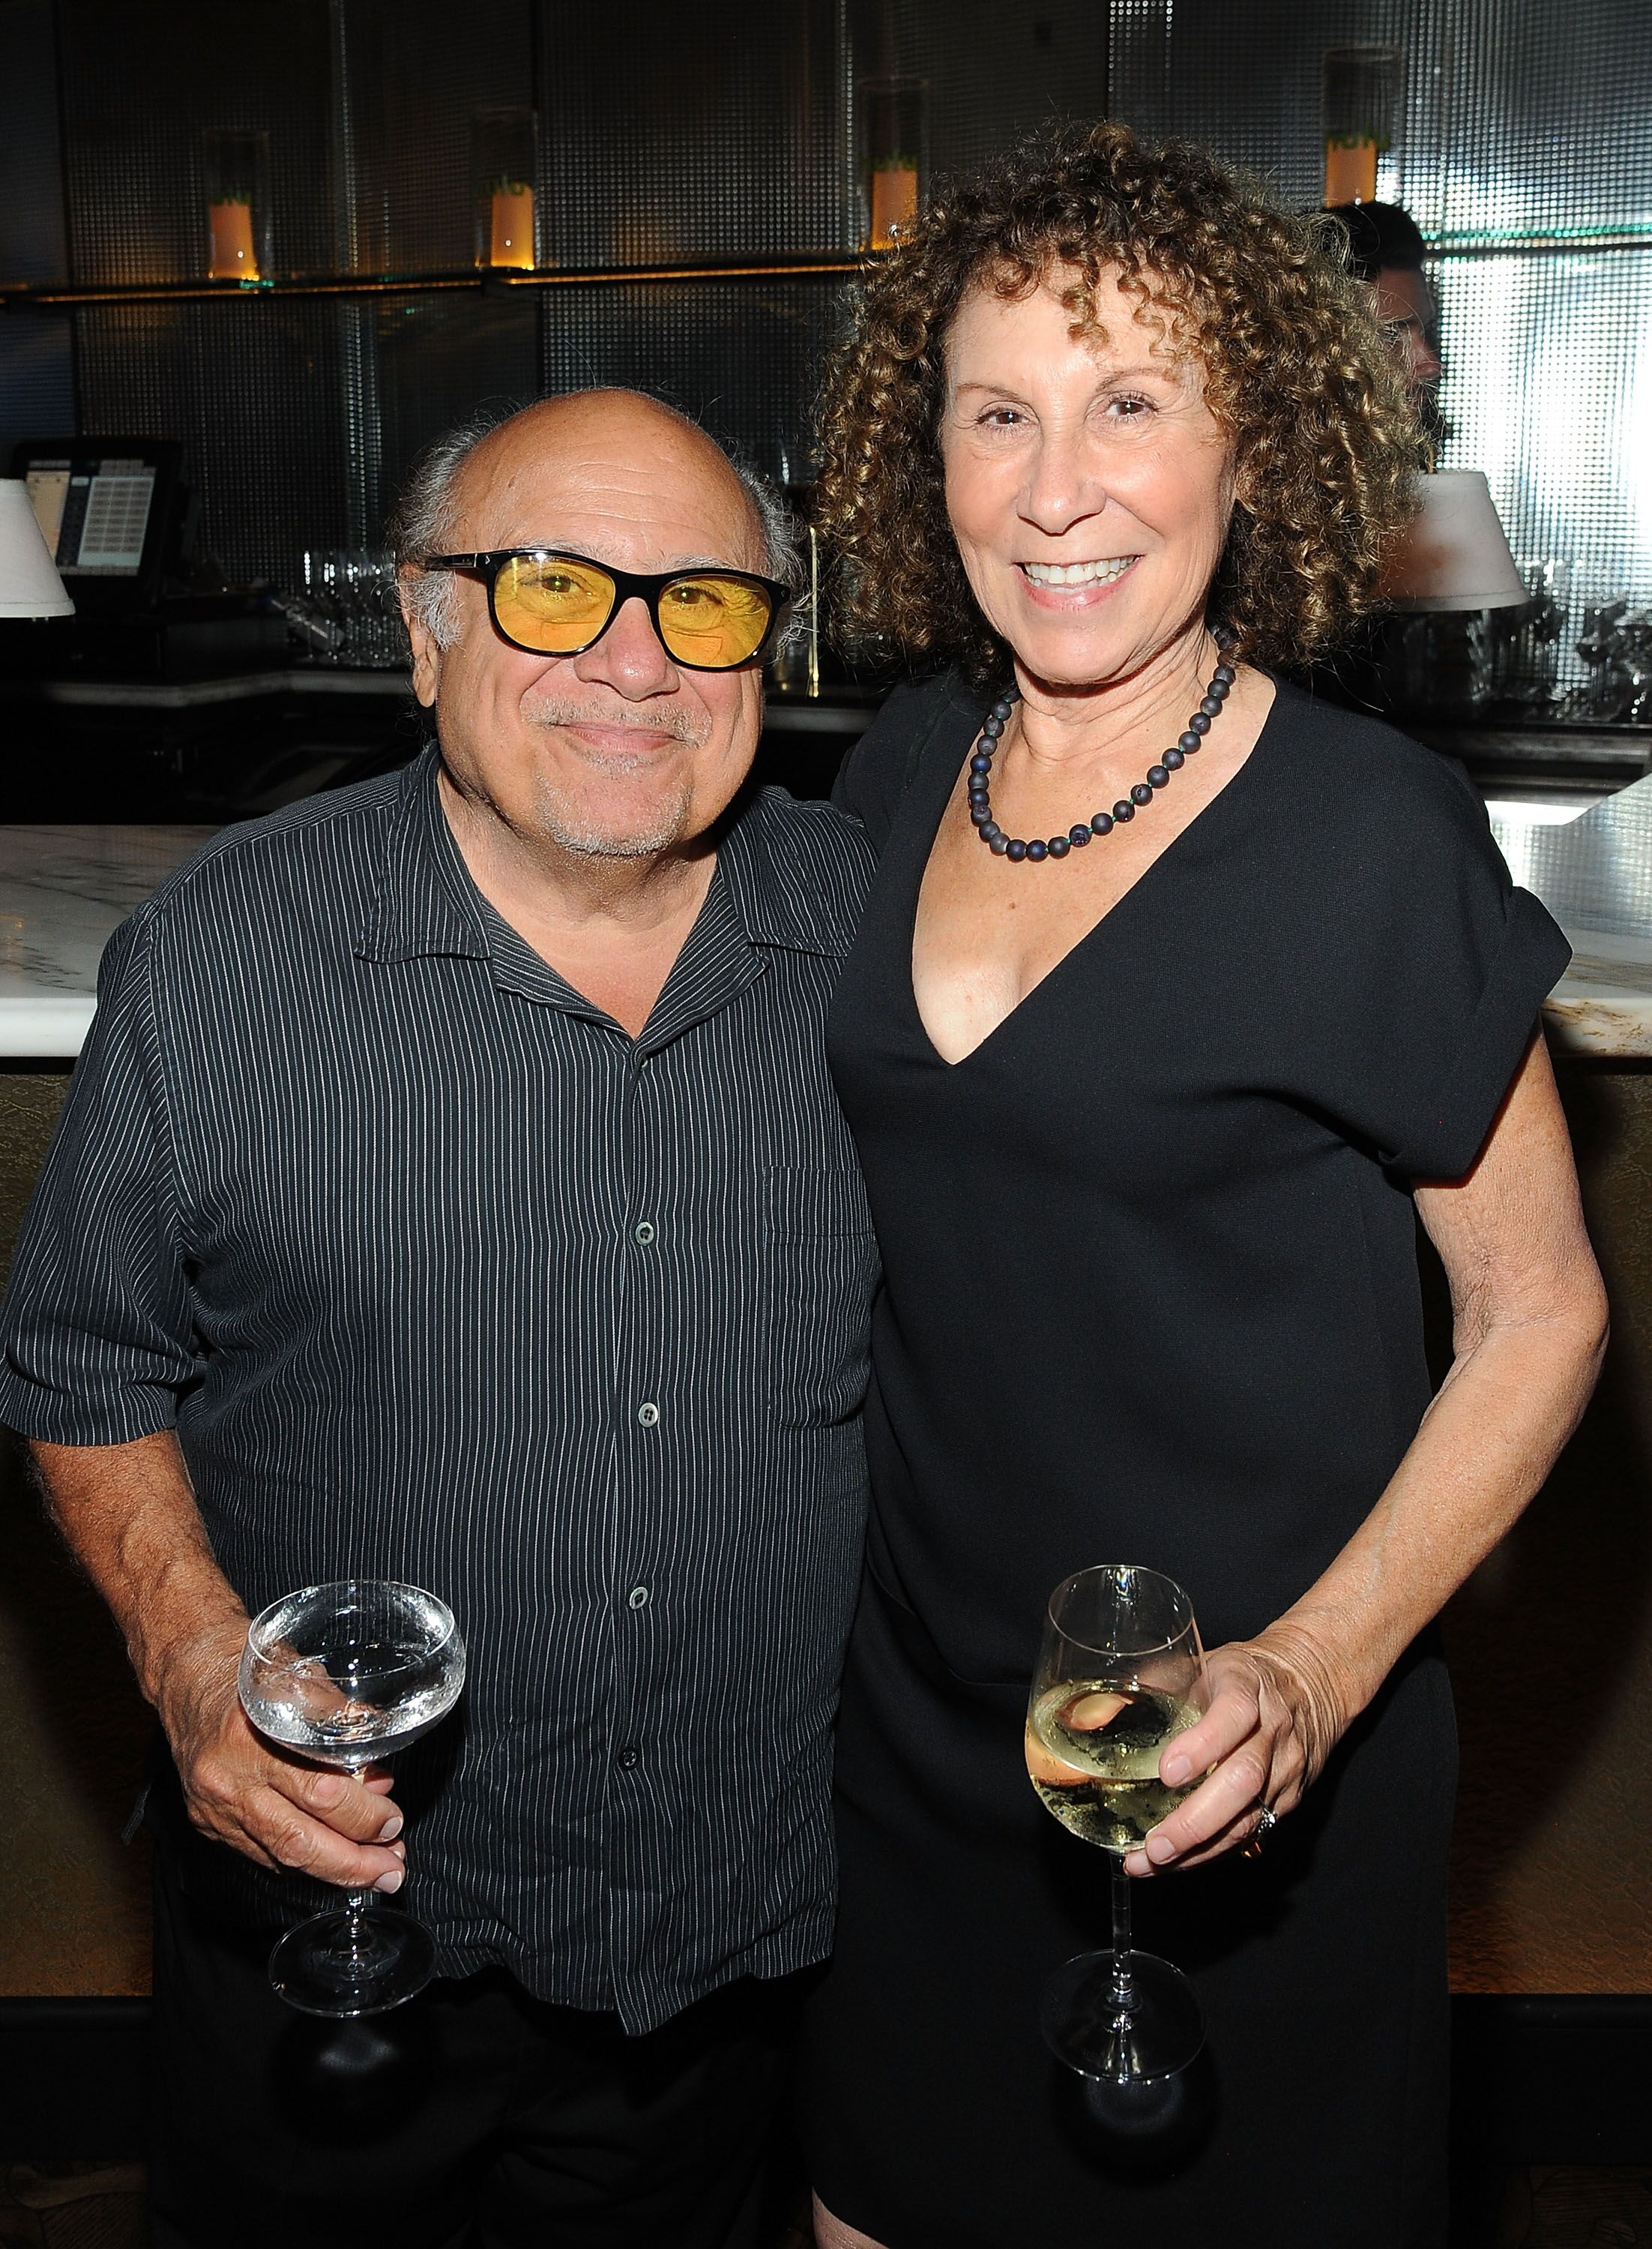 Danny DeVito and Rhea Perlman attend Hulu's 'The Mindy Project' Season Four premiere. | Source: Getty Images